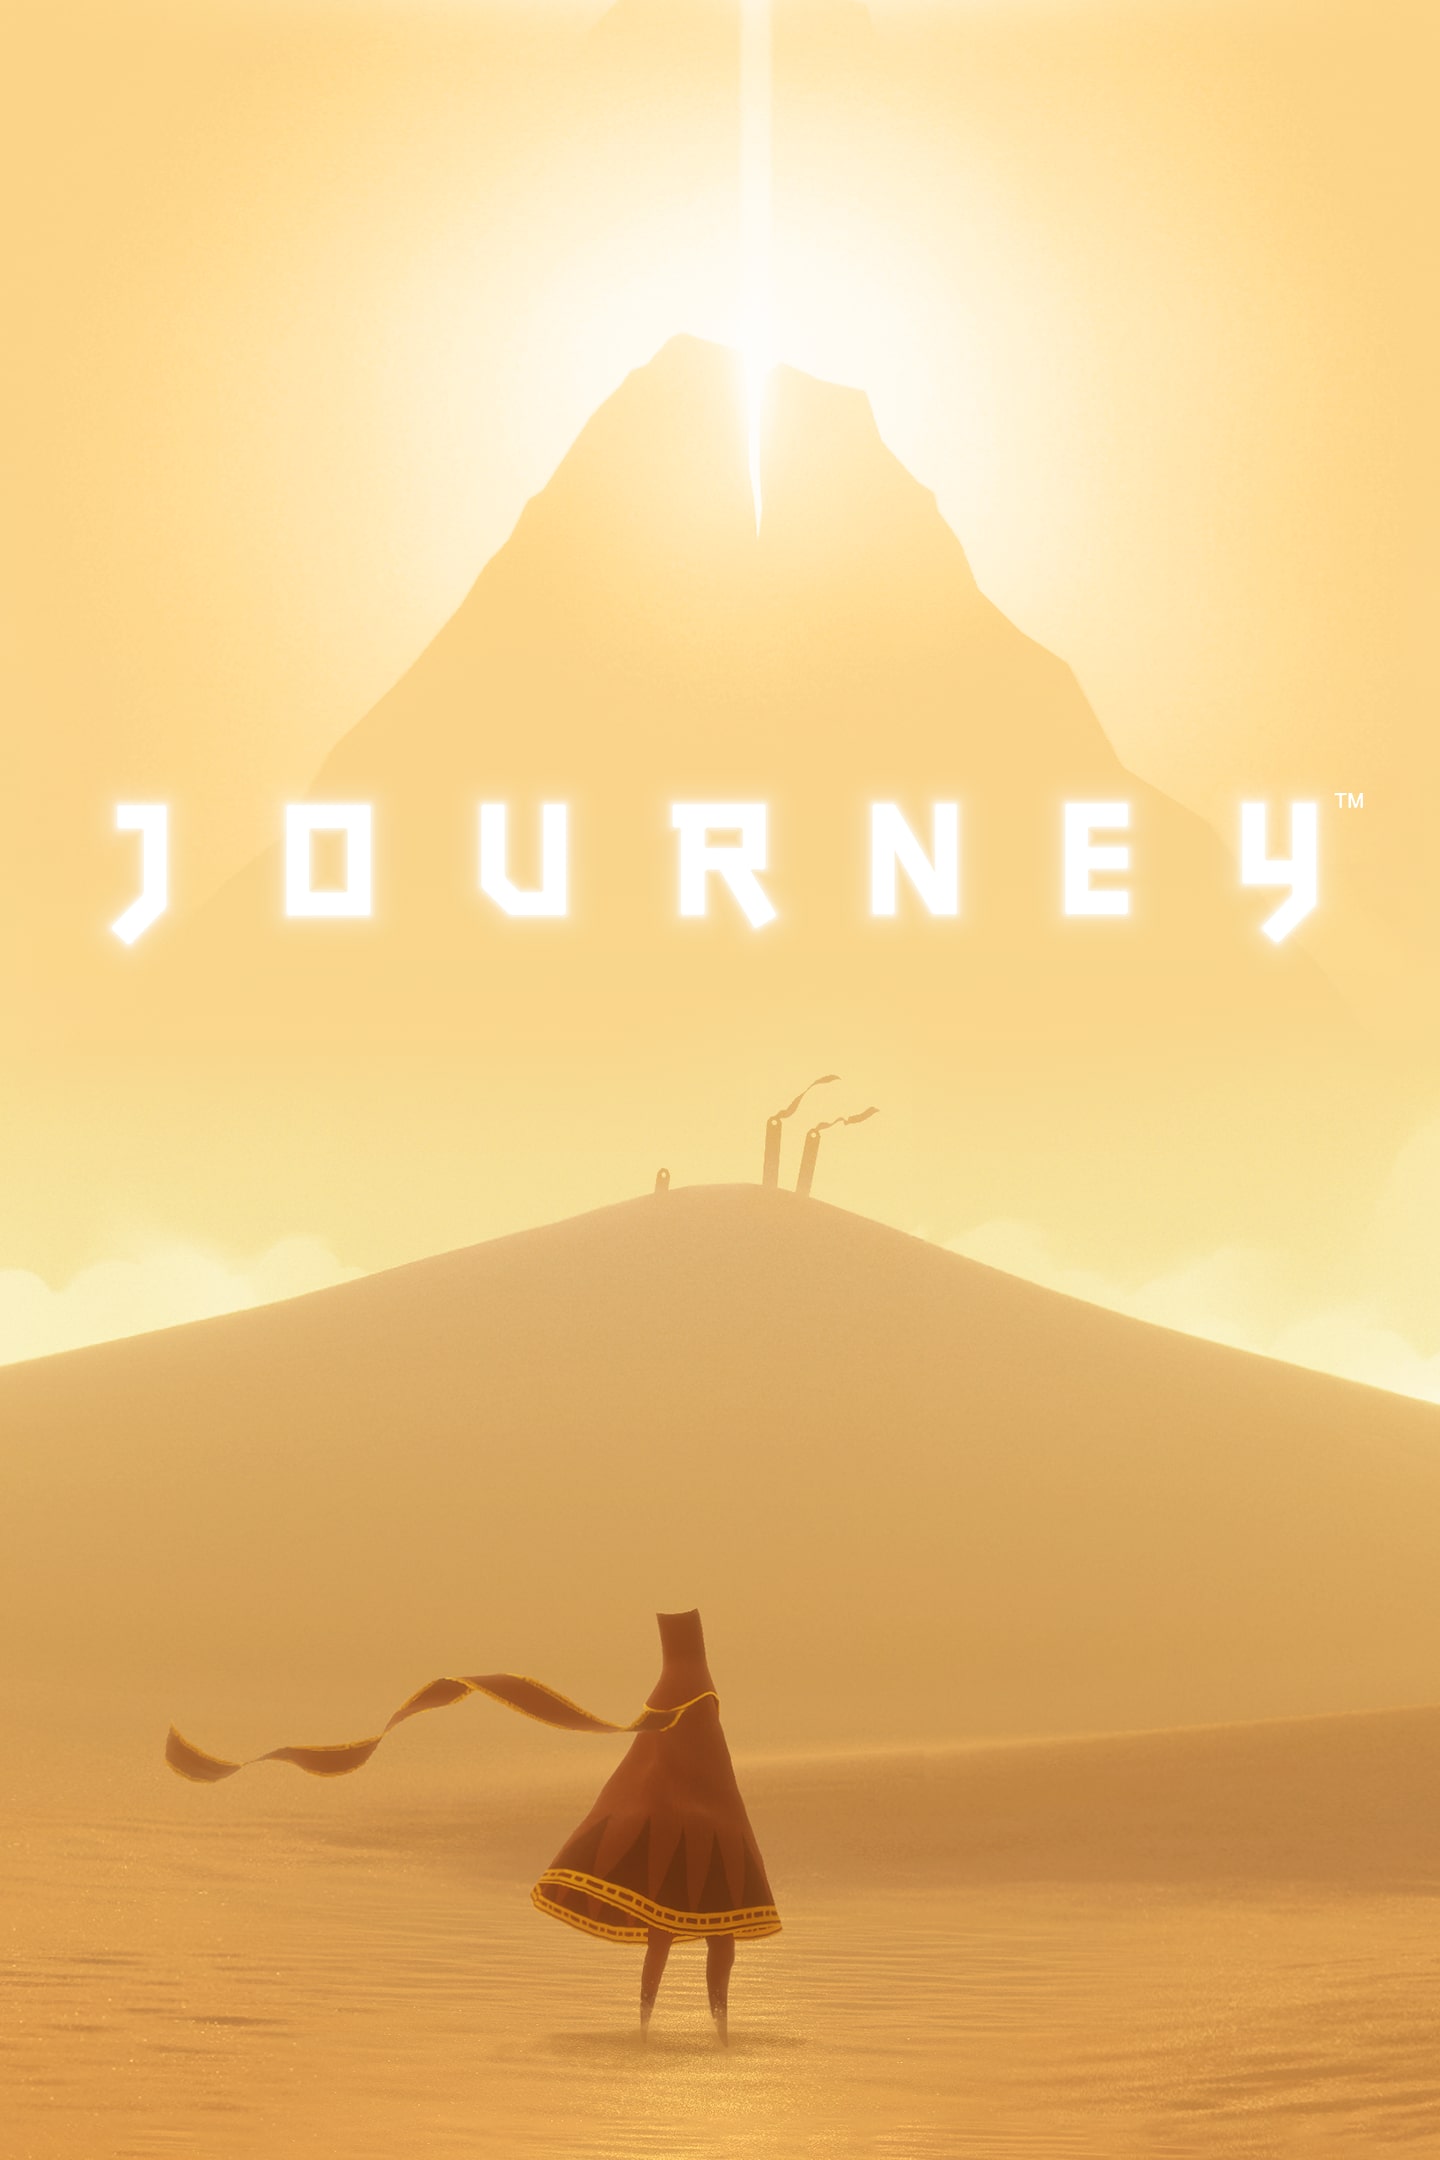 The Journey Ps4 | peacecommission.kdsg.gov.ng